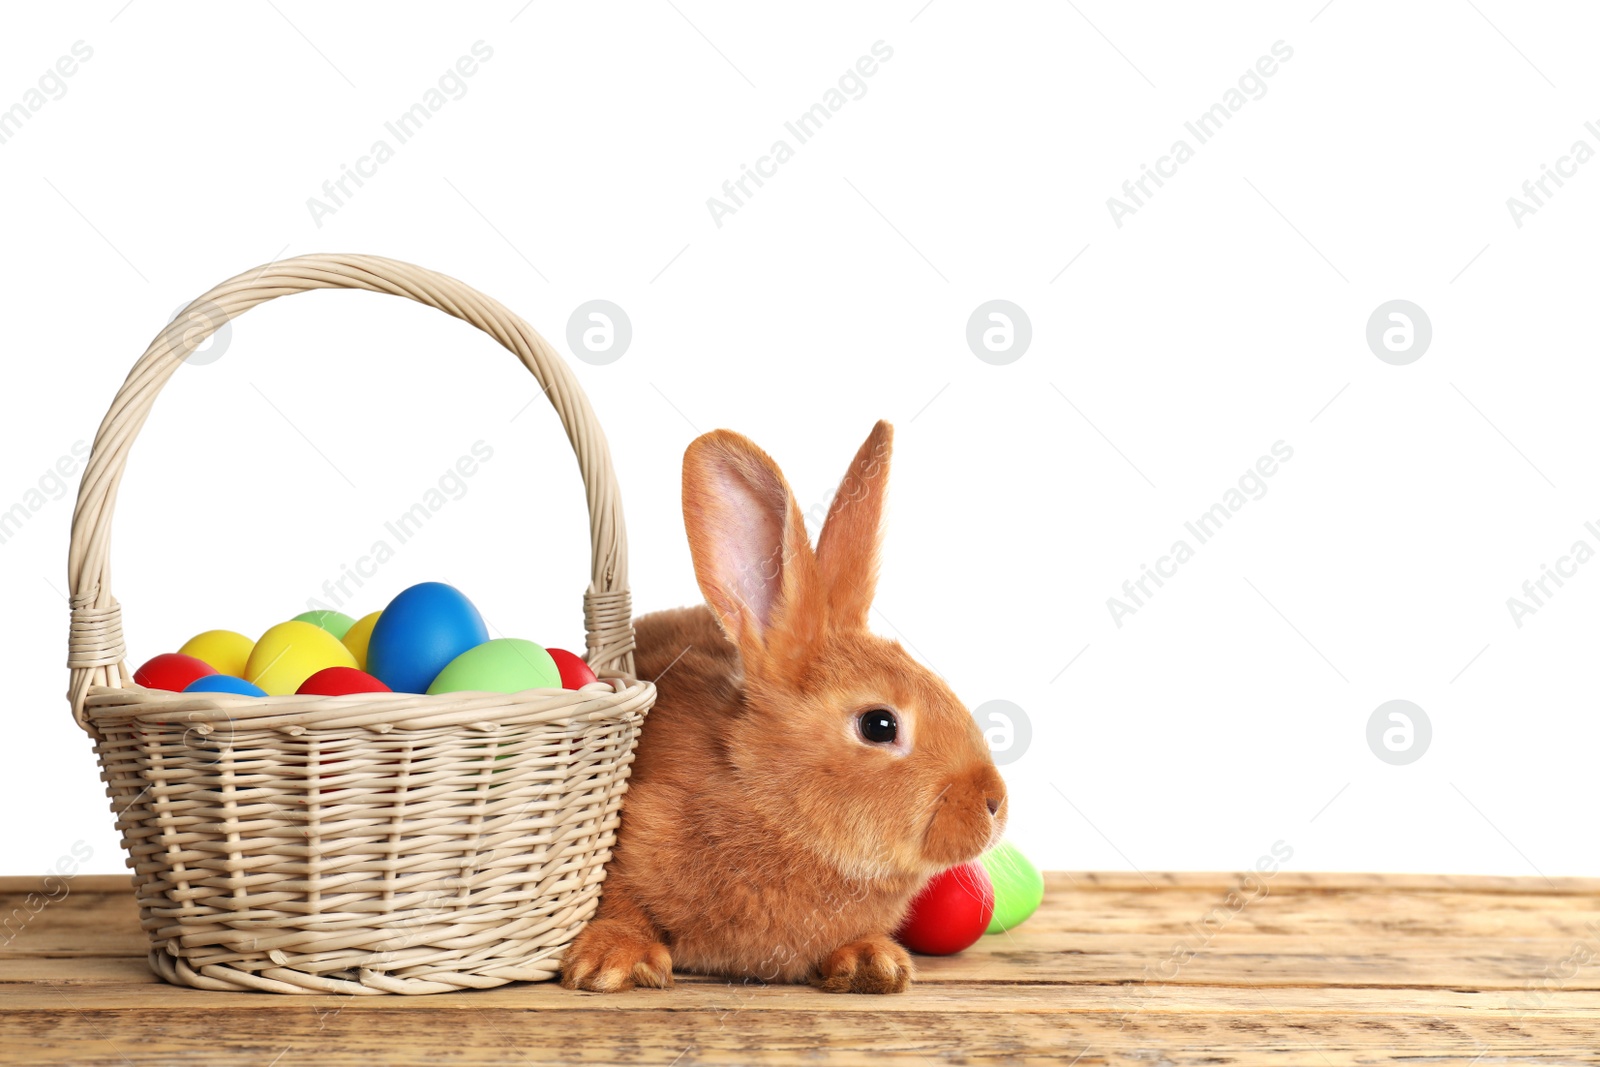 Photo of Adorable furry Easter bunny near wicker basket with dyed eggs on wooden table against white background